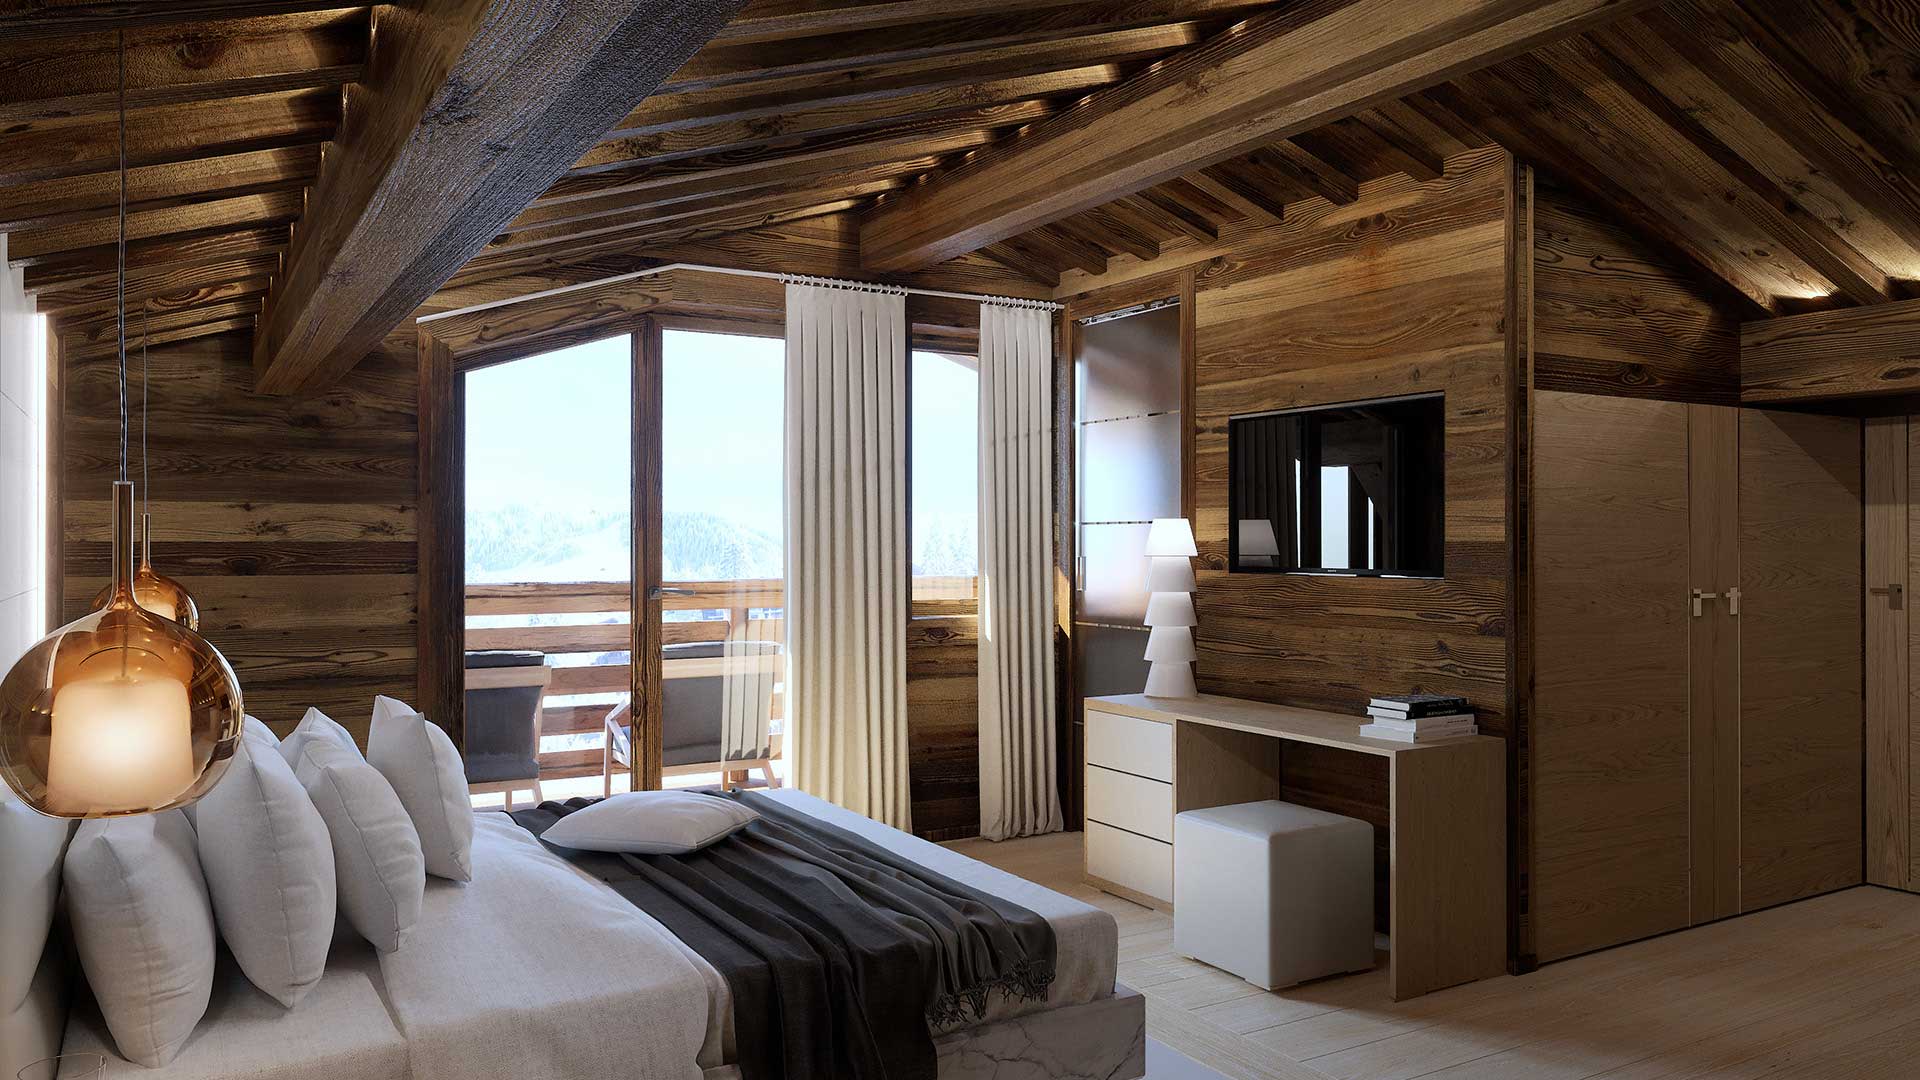 3D View of a room for the real estate promotion of a luxurious chalet.